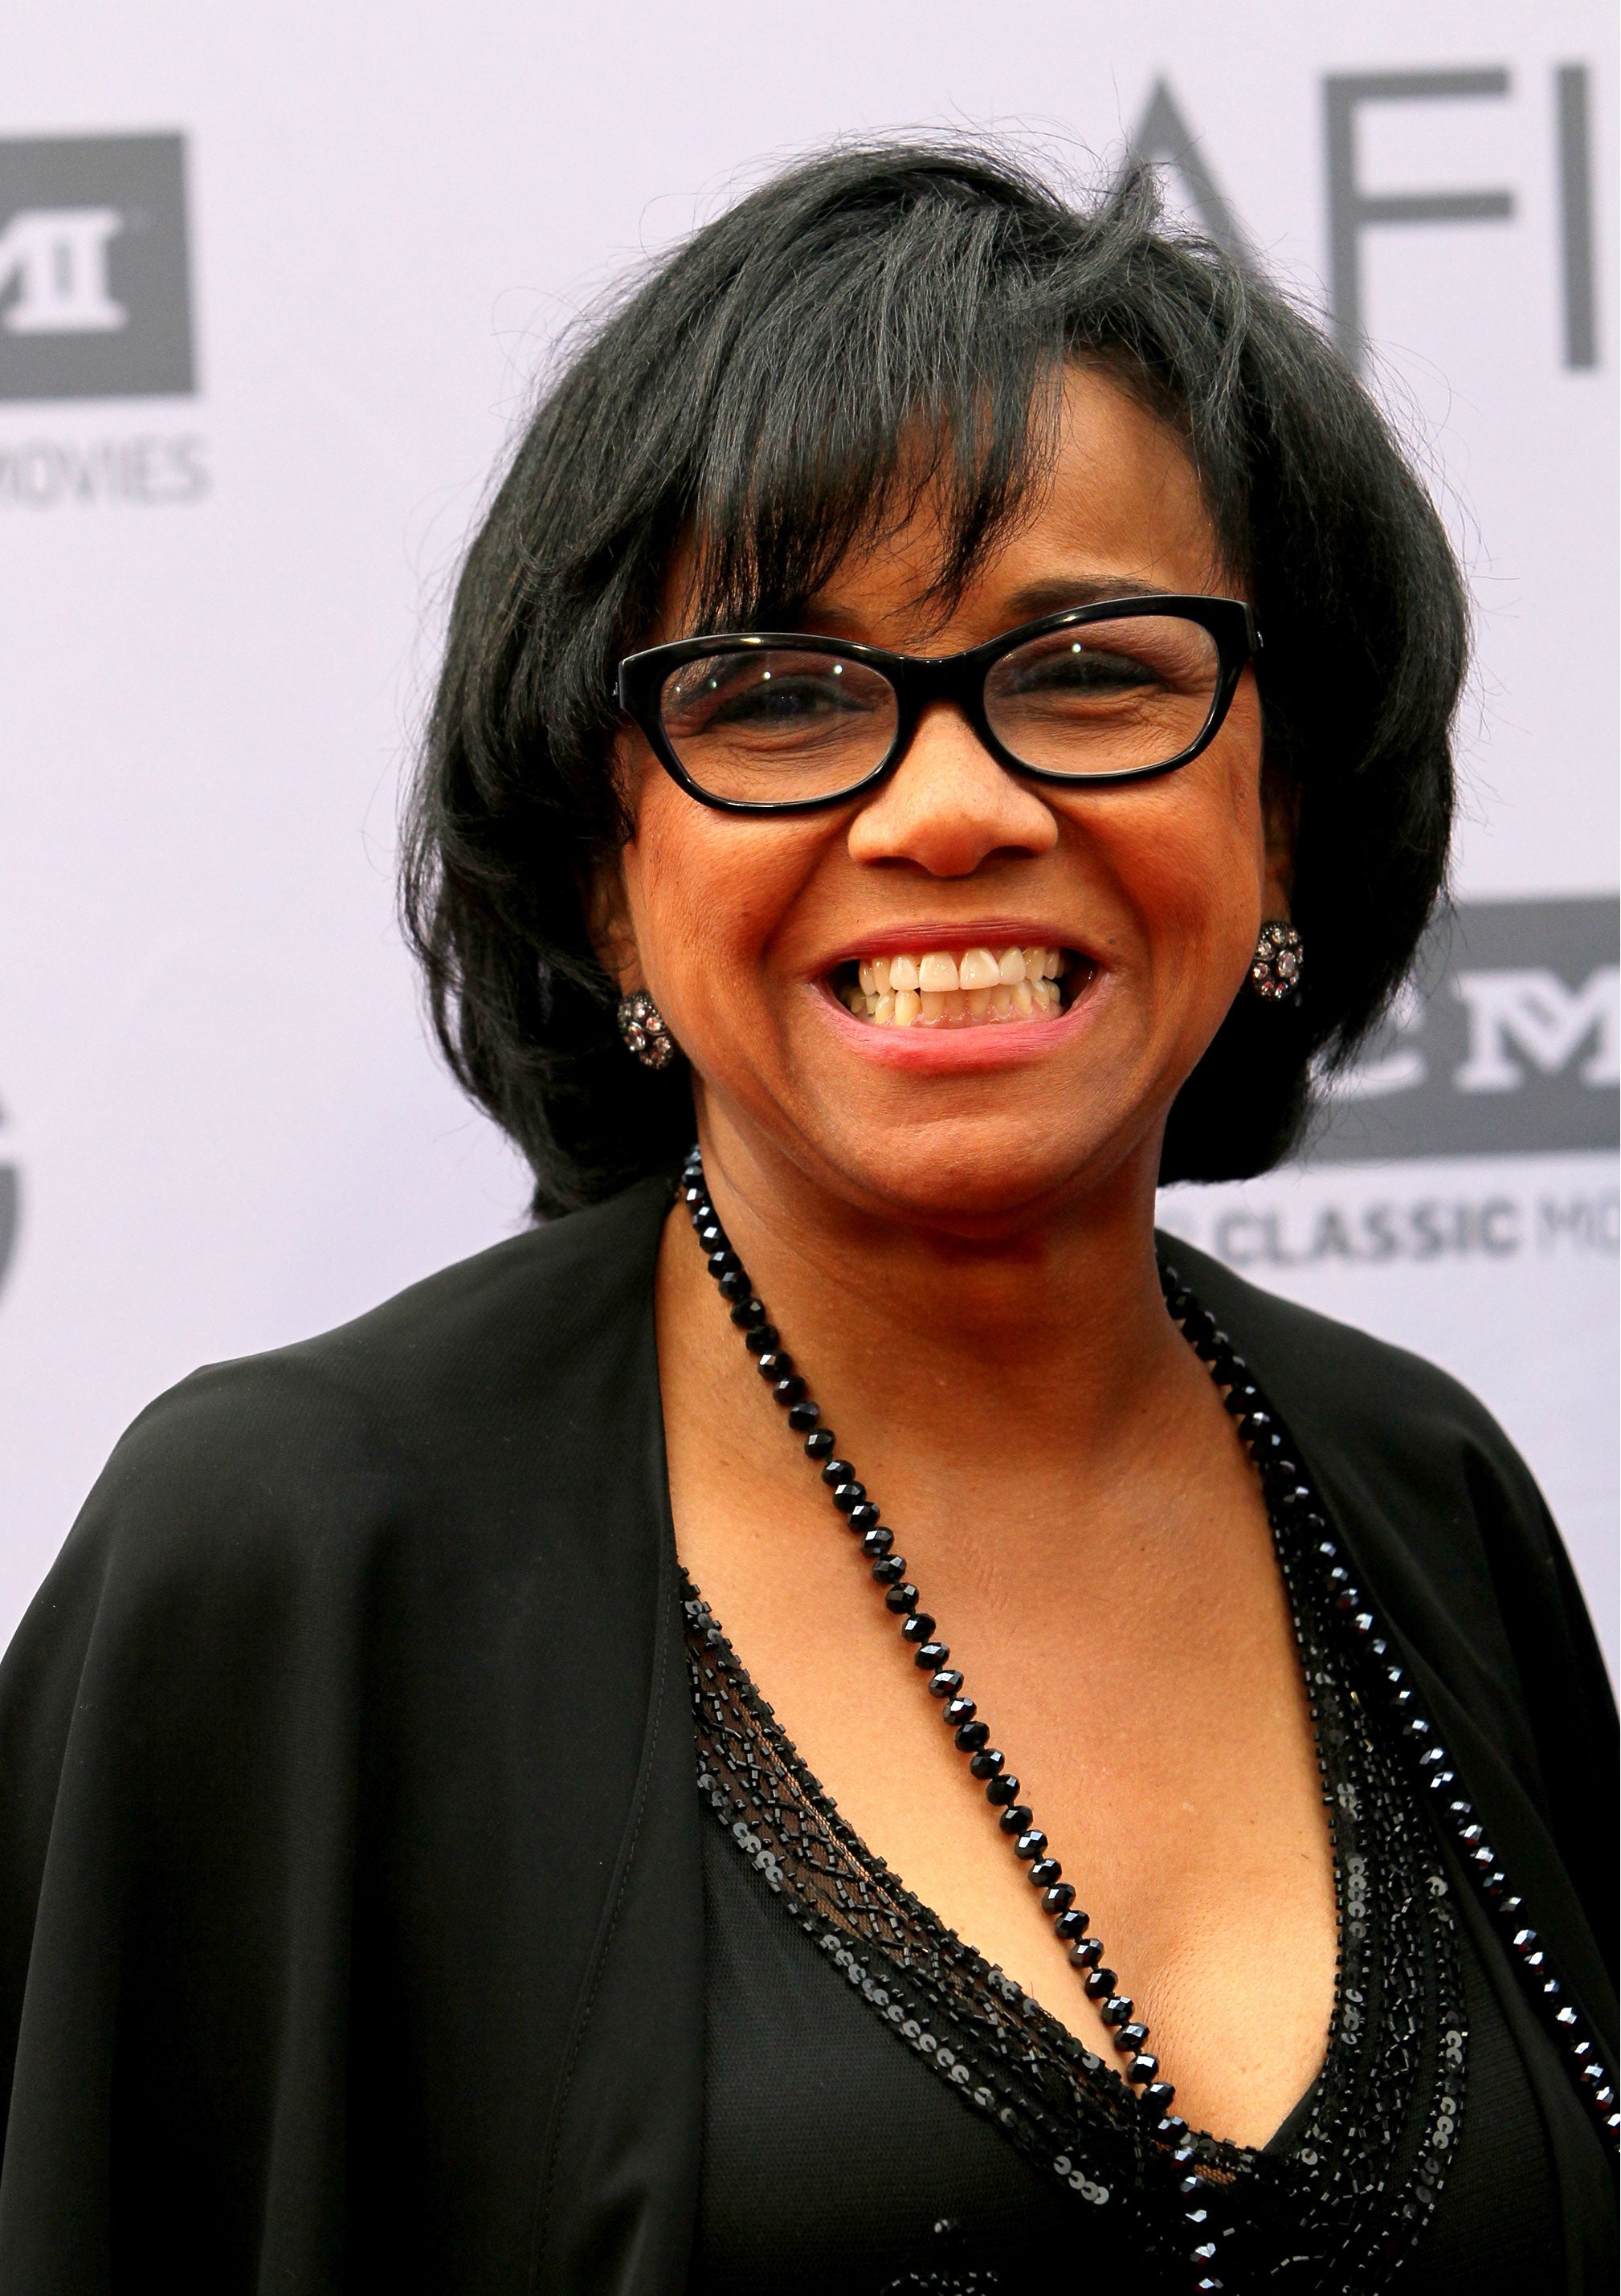 The Academy Re-Elects Cheryl Boone Isaacs As President

 
